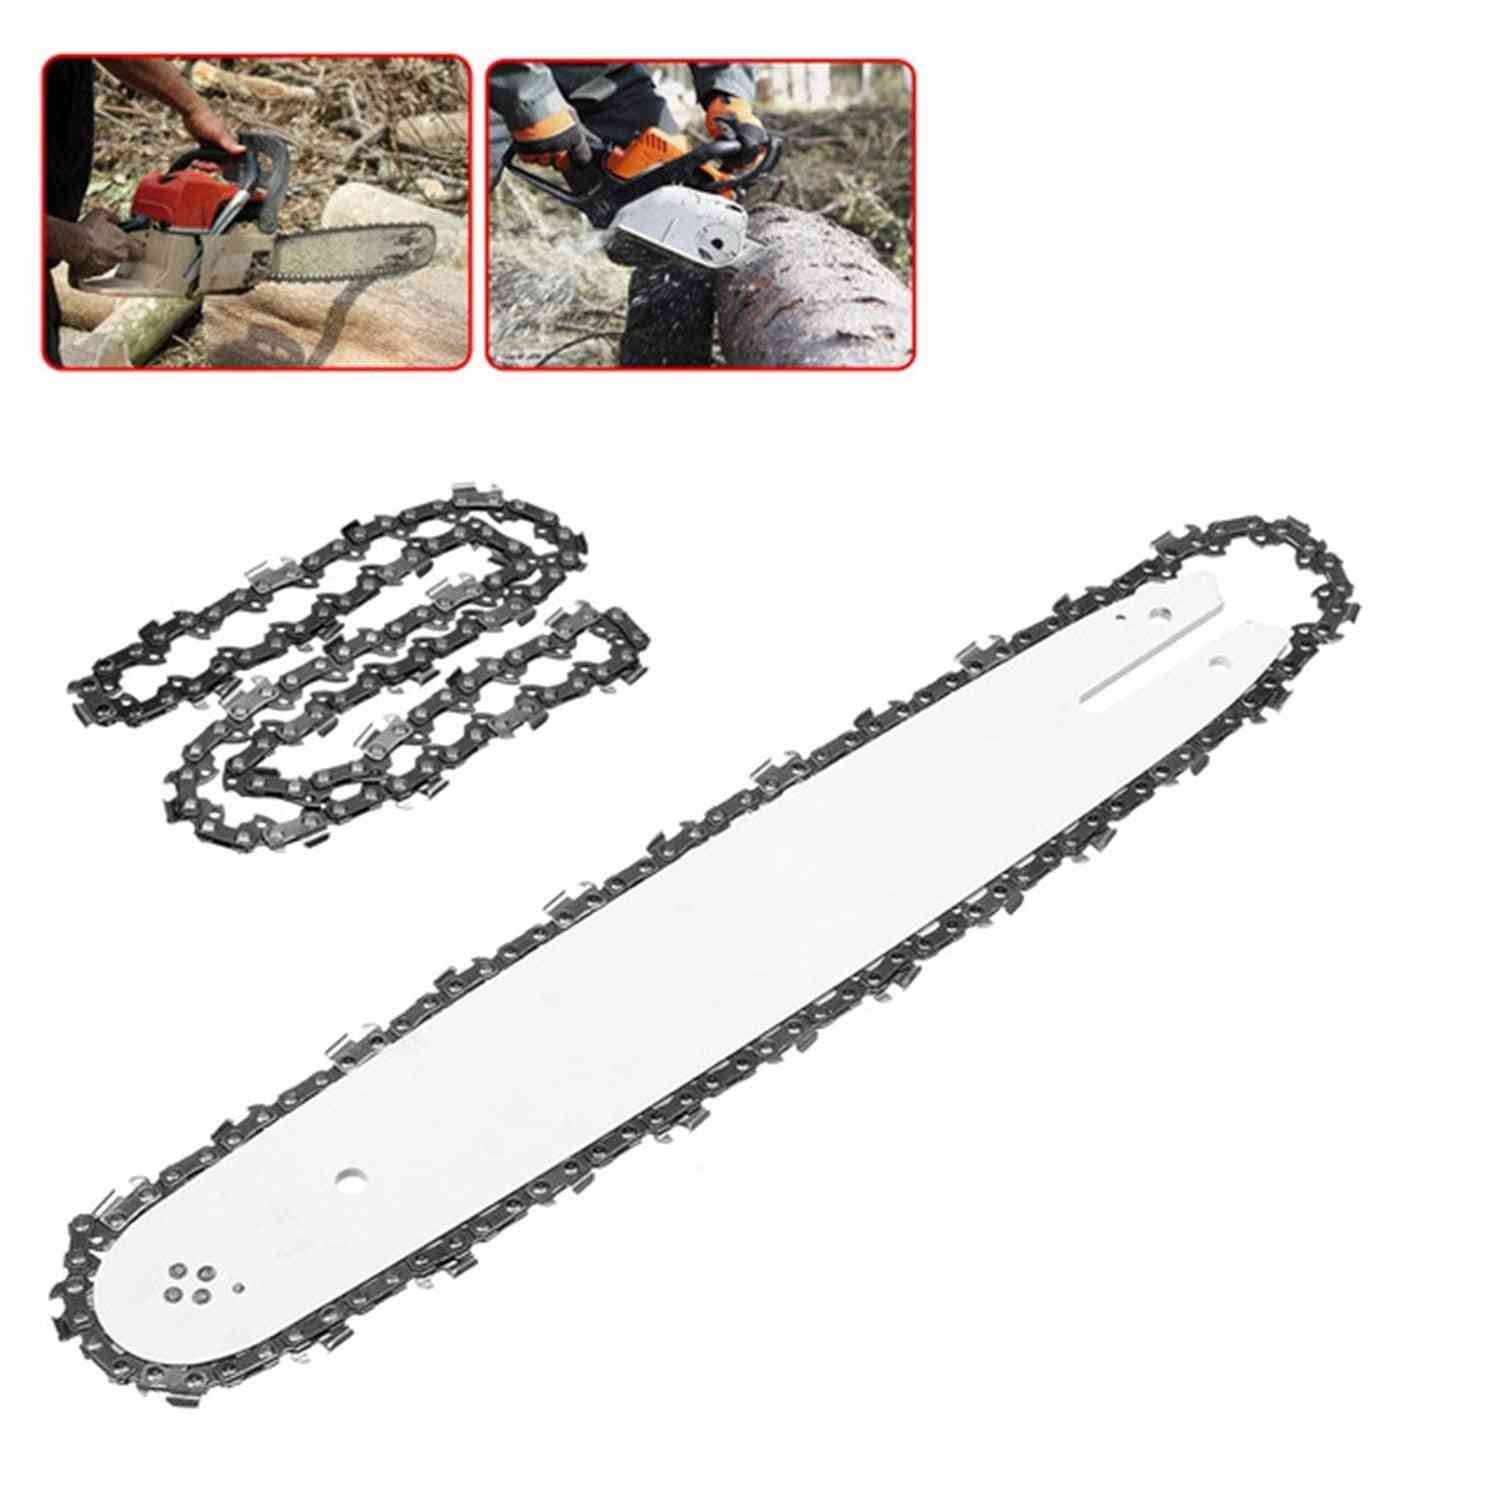 14 Inch Bar +3/8l 2pcs Chains For Chainsaw Sets